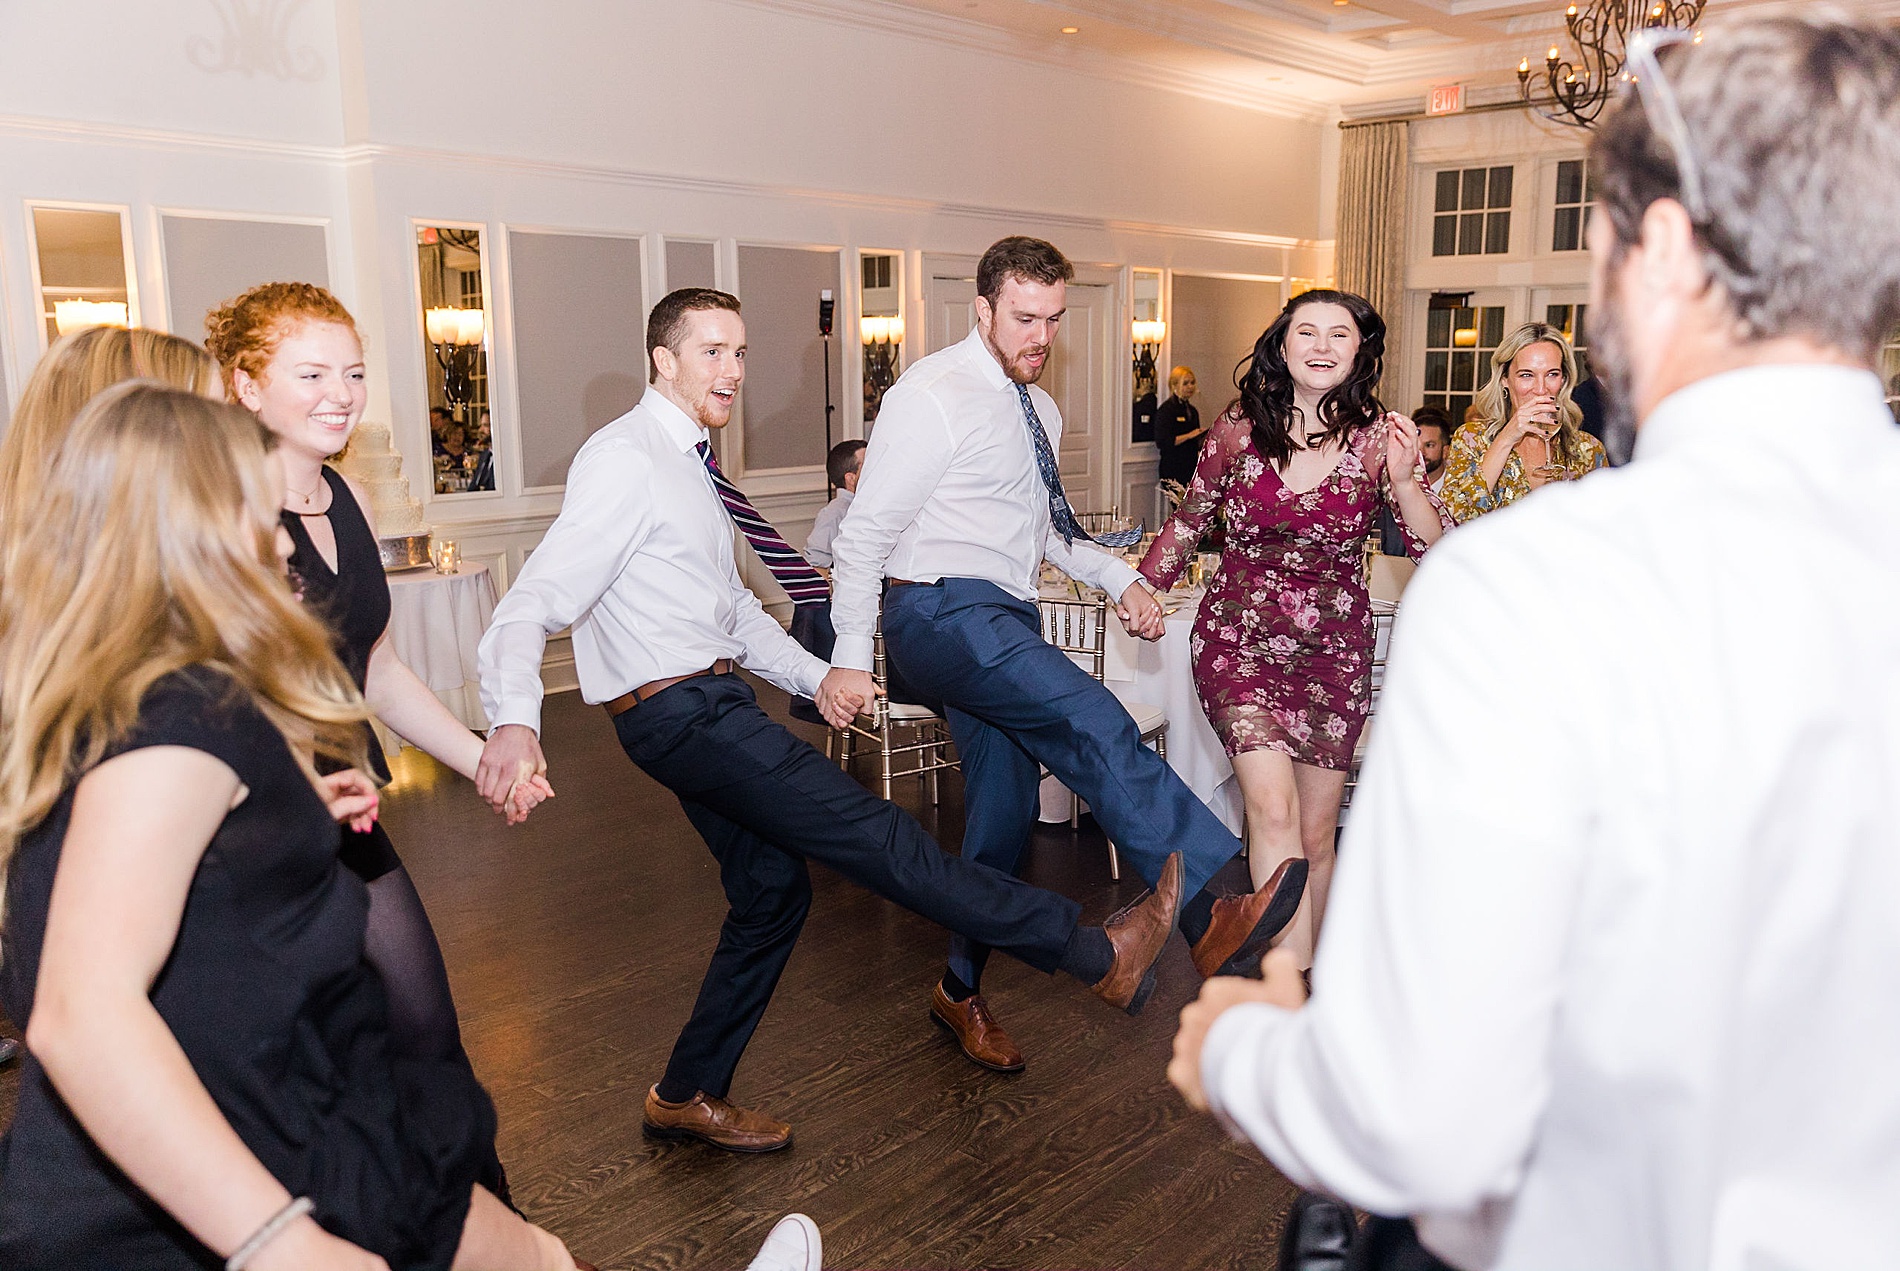 Guests on the dance floor at Pa wedding 